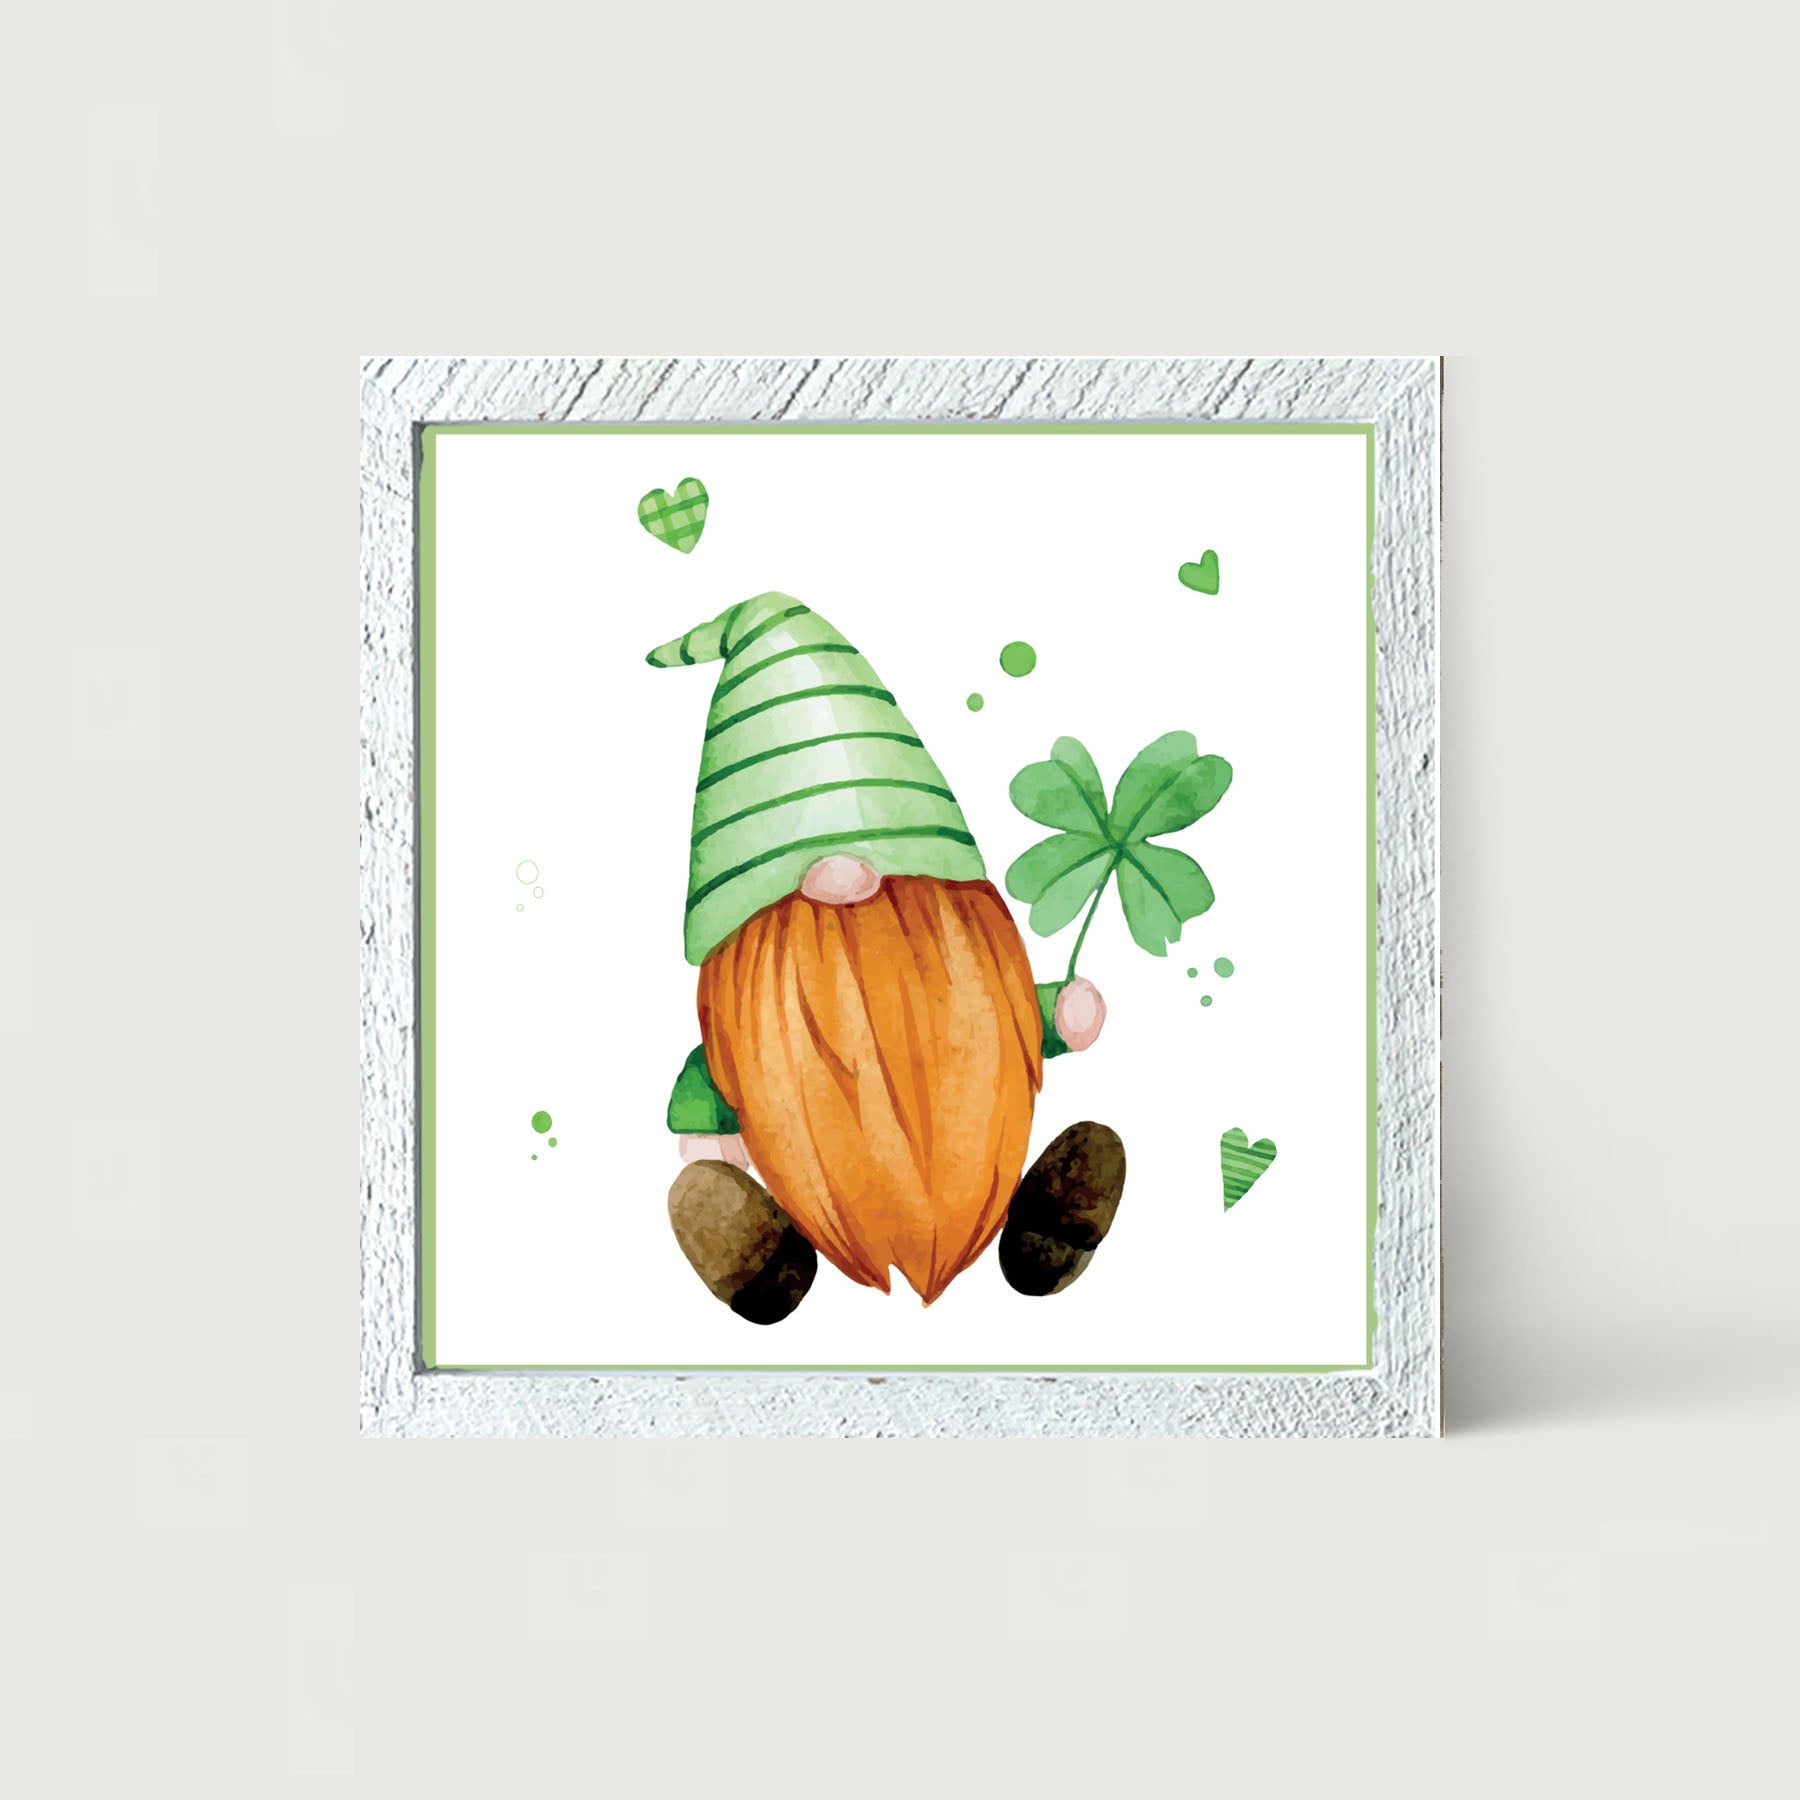 St. Patrick Gnome With Green Hat - Framed art